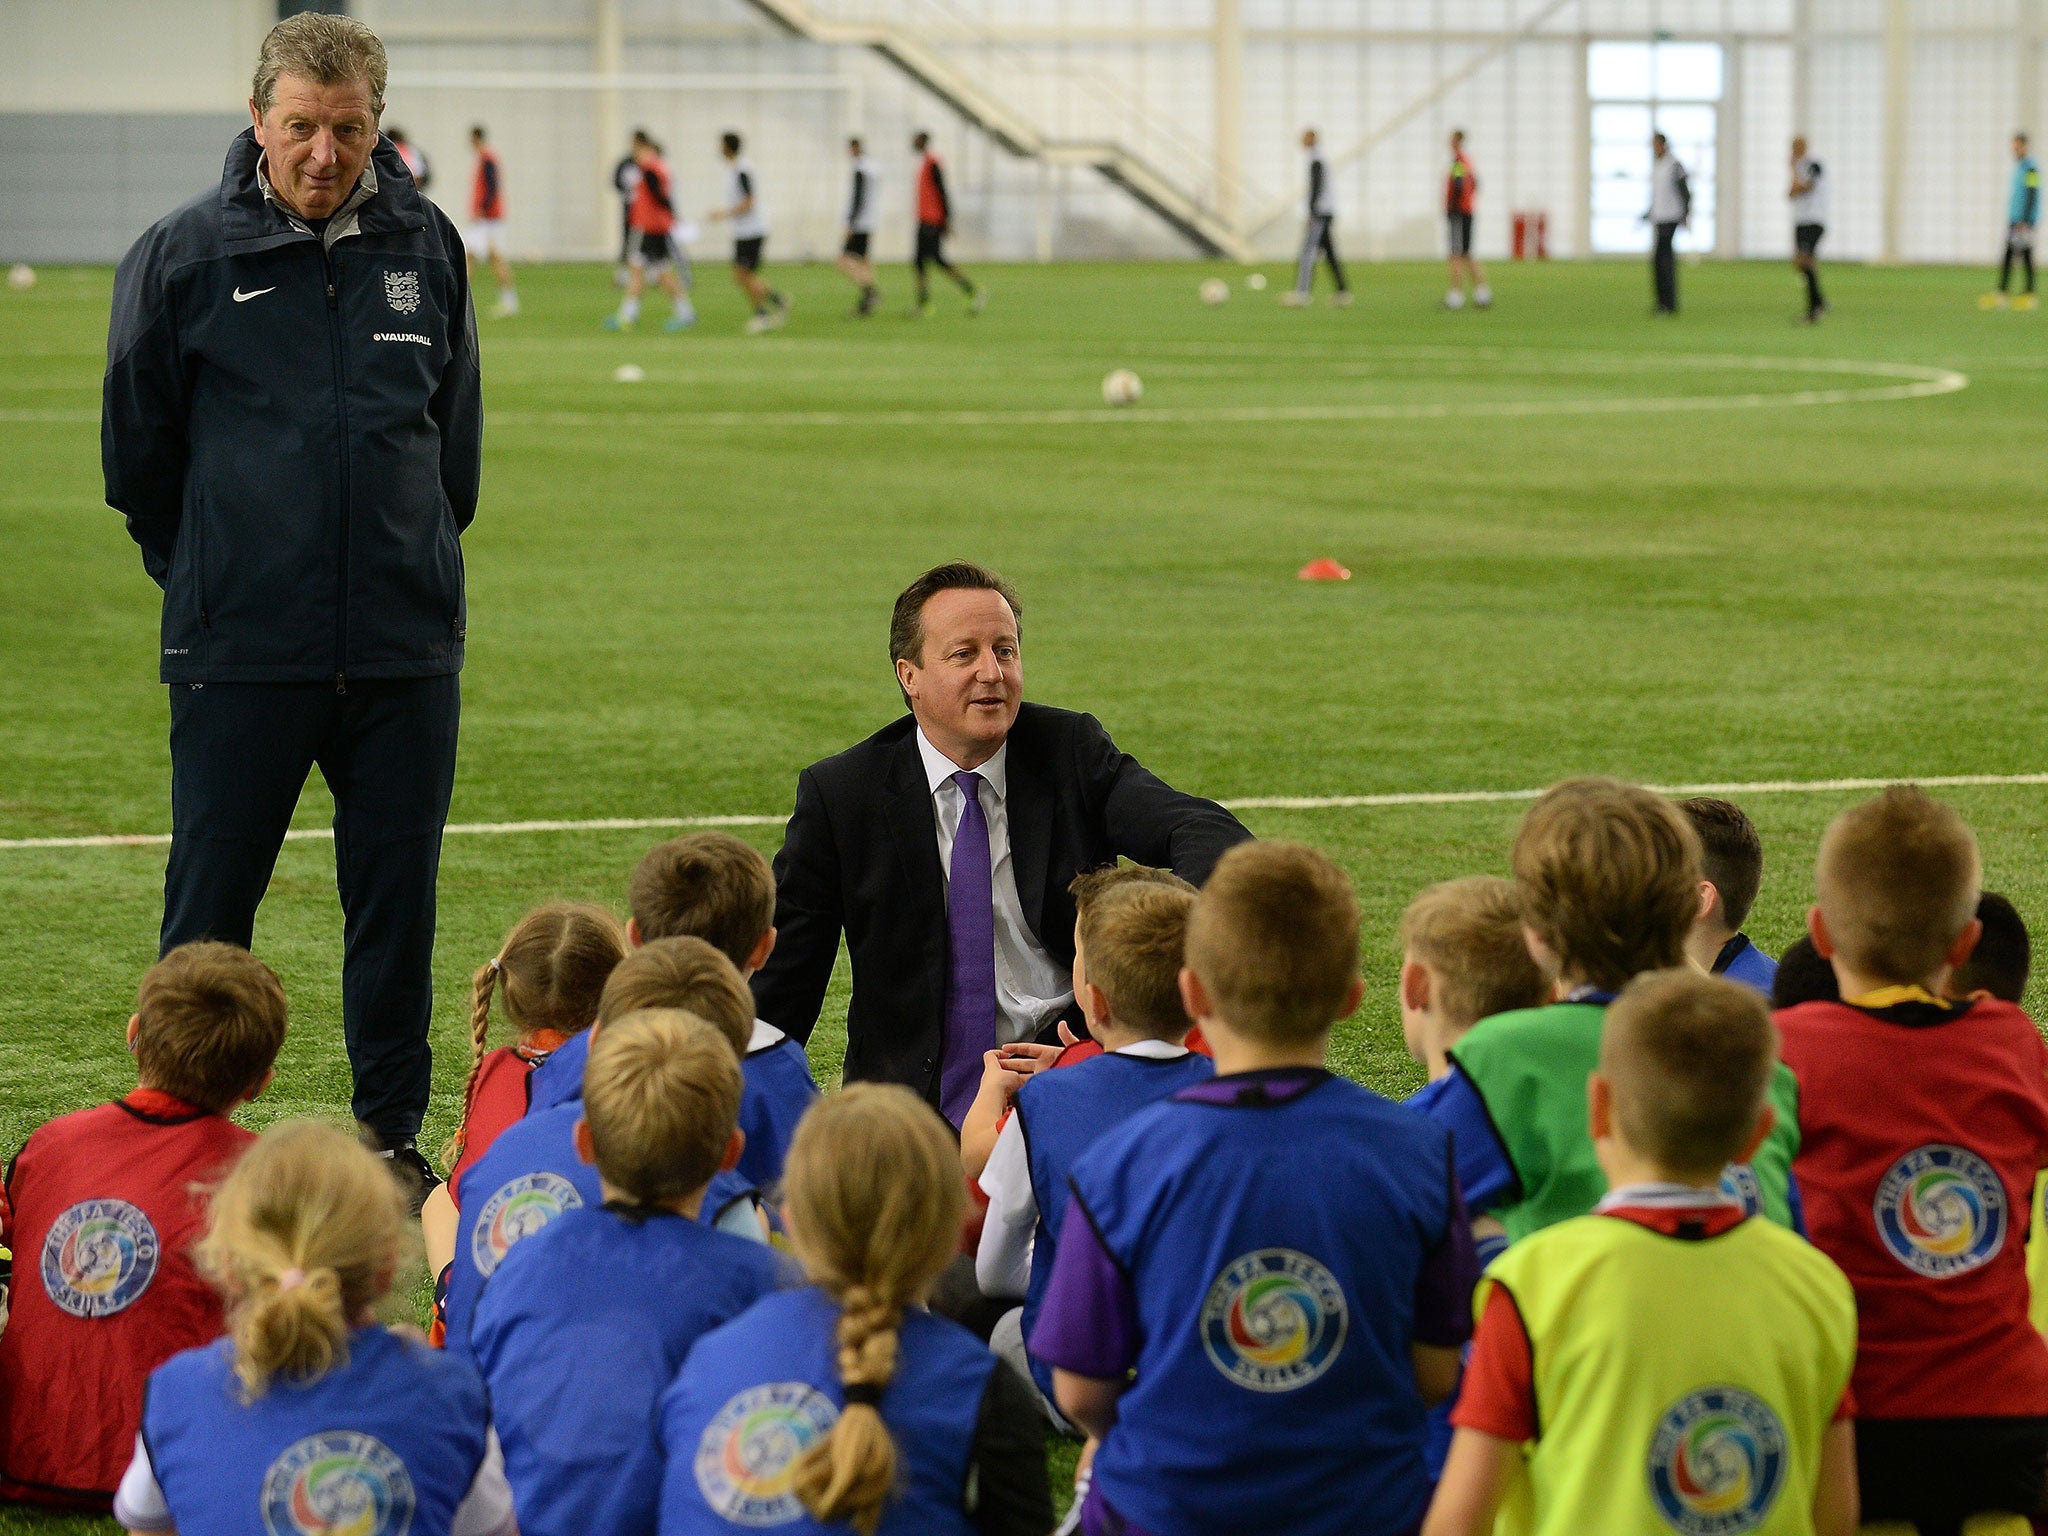 David Cameron, (centre) with England manager Roy Hodgson (left), has included little about football in the Conservative manifesto